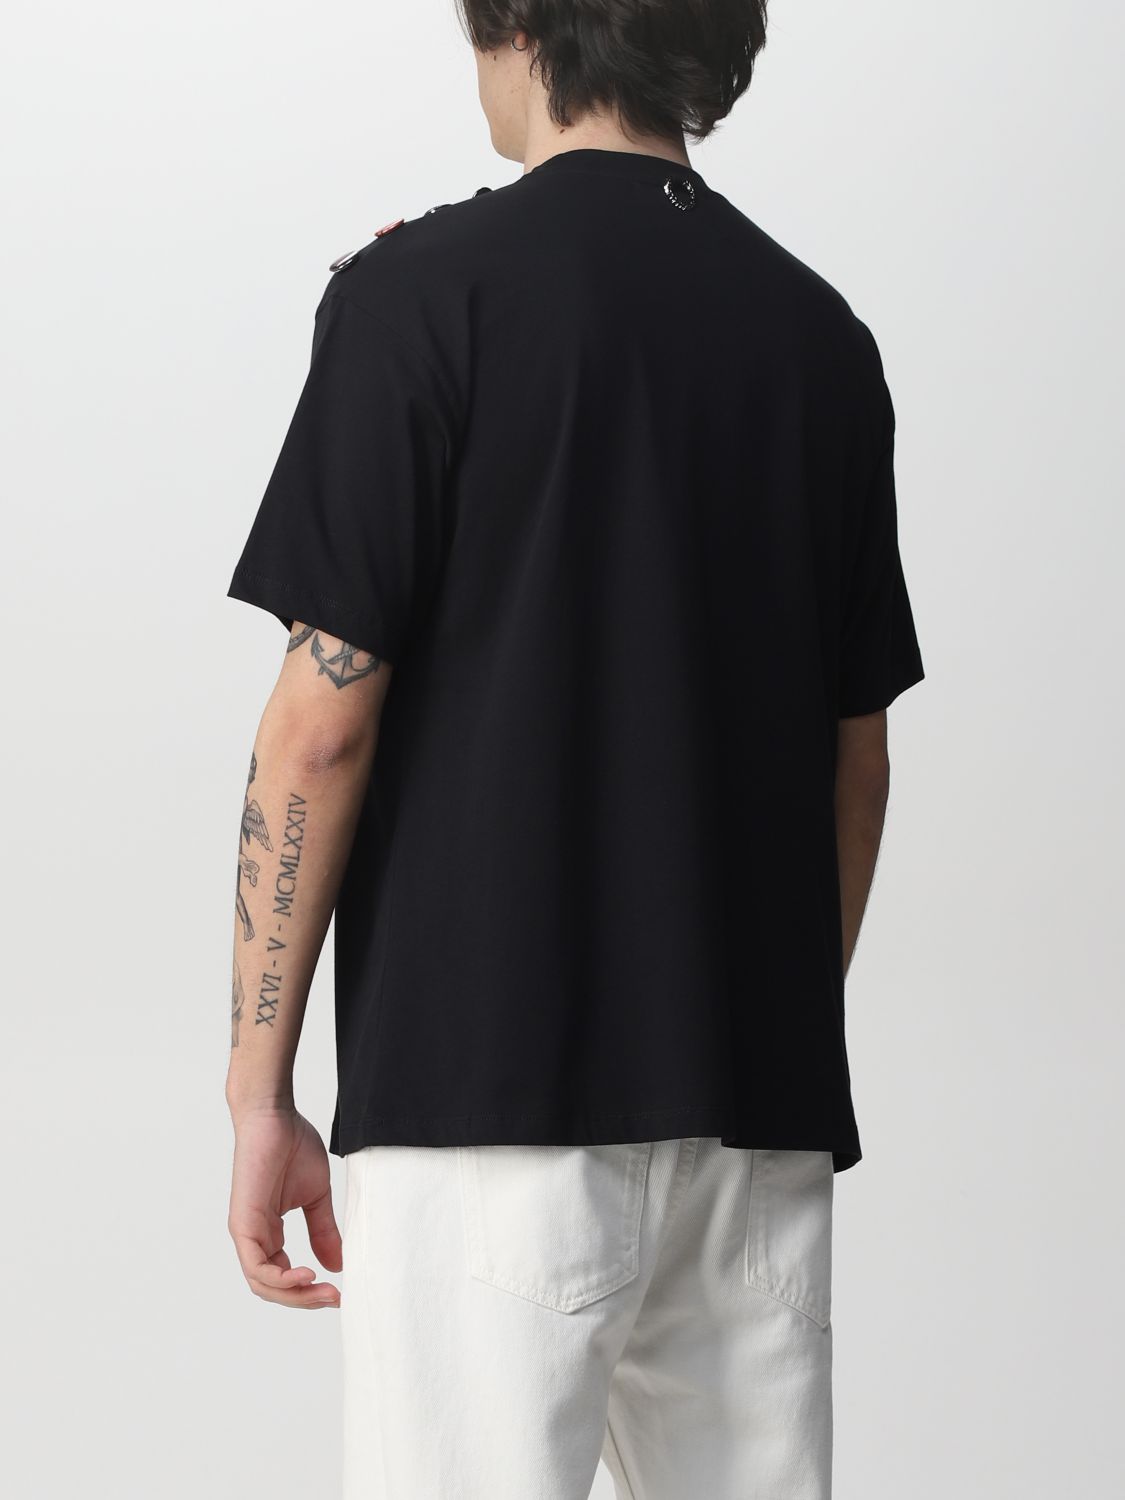 Tシャツ Fred Perry By Raf Simons: Tシャツ メンズ Fred Perry By Raf Simons ブラック 2